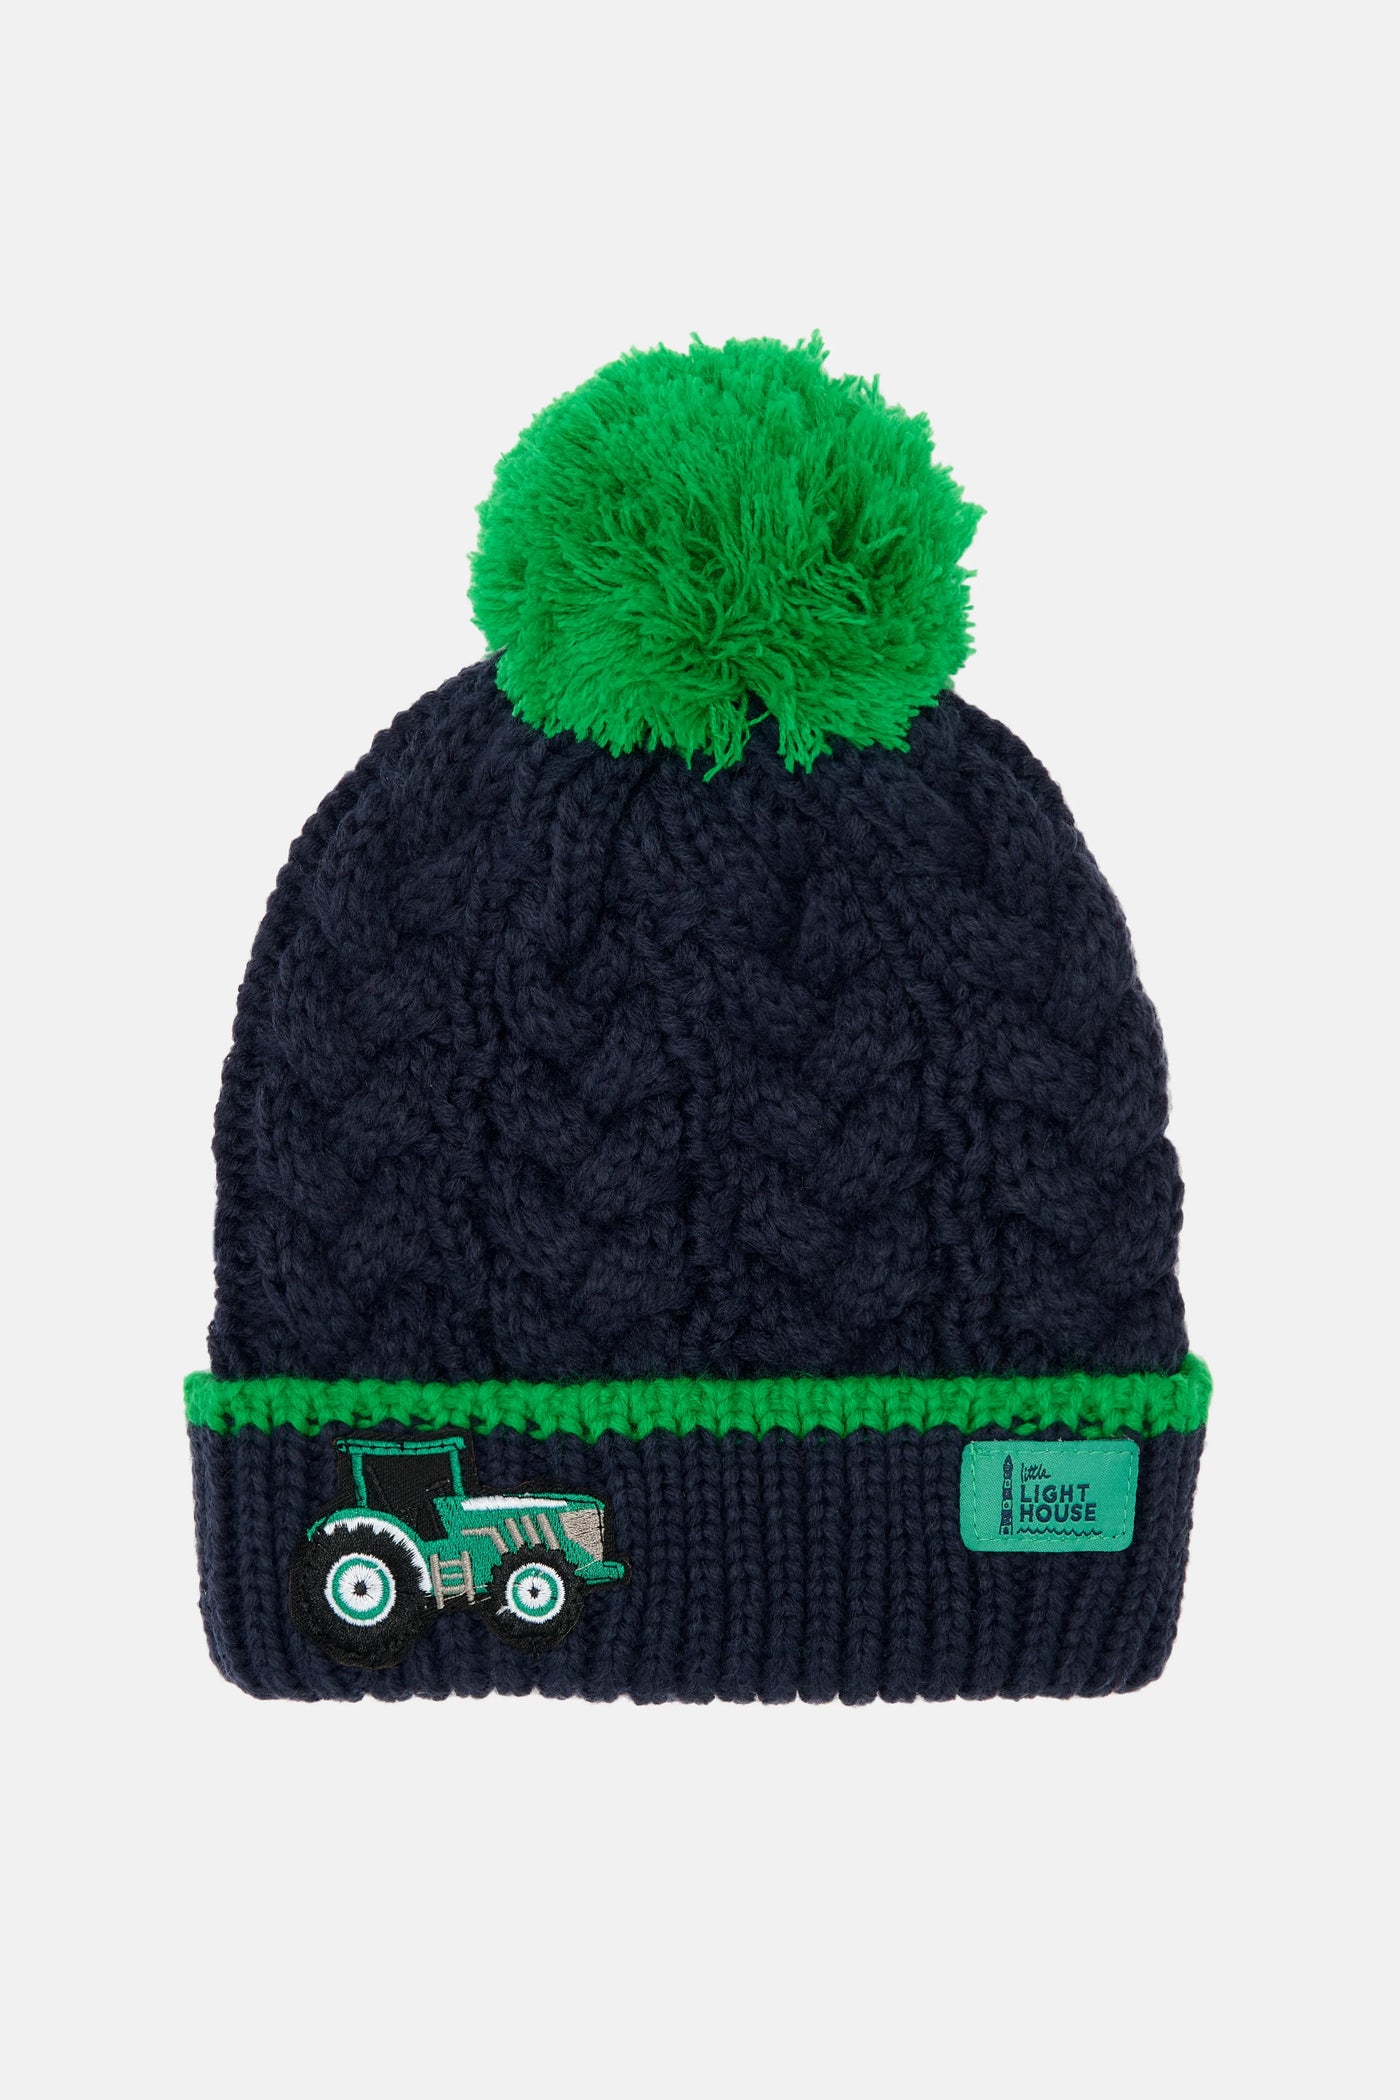 Lighthouse Green Tractor Cable Knit Bobble Hat